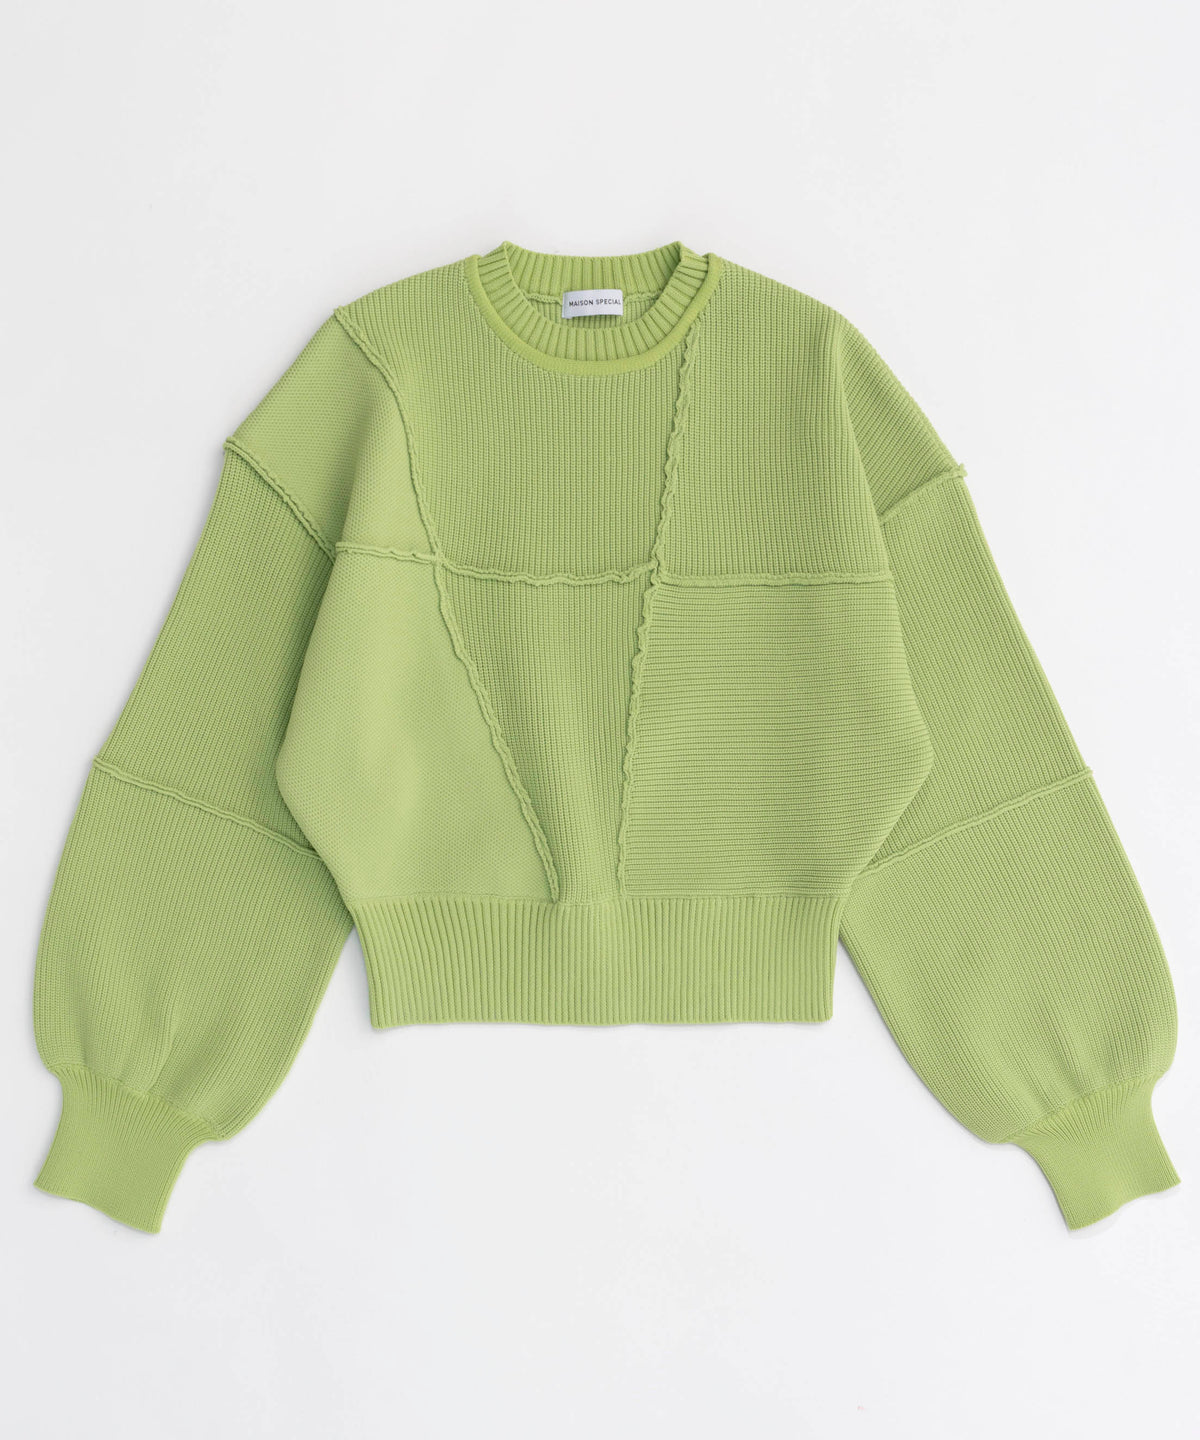 【24AUTUMN PRE-ORDER】Outseam Cocoon Sleeve Knitwear